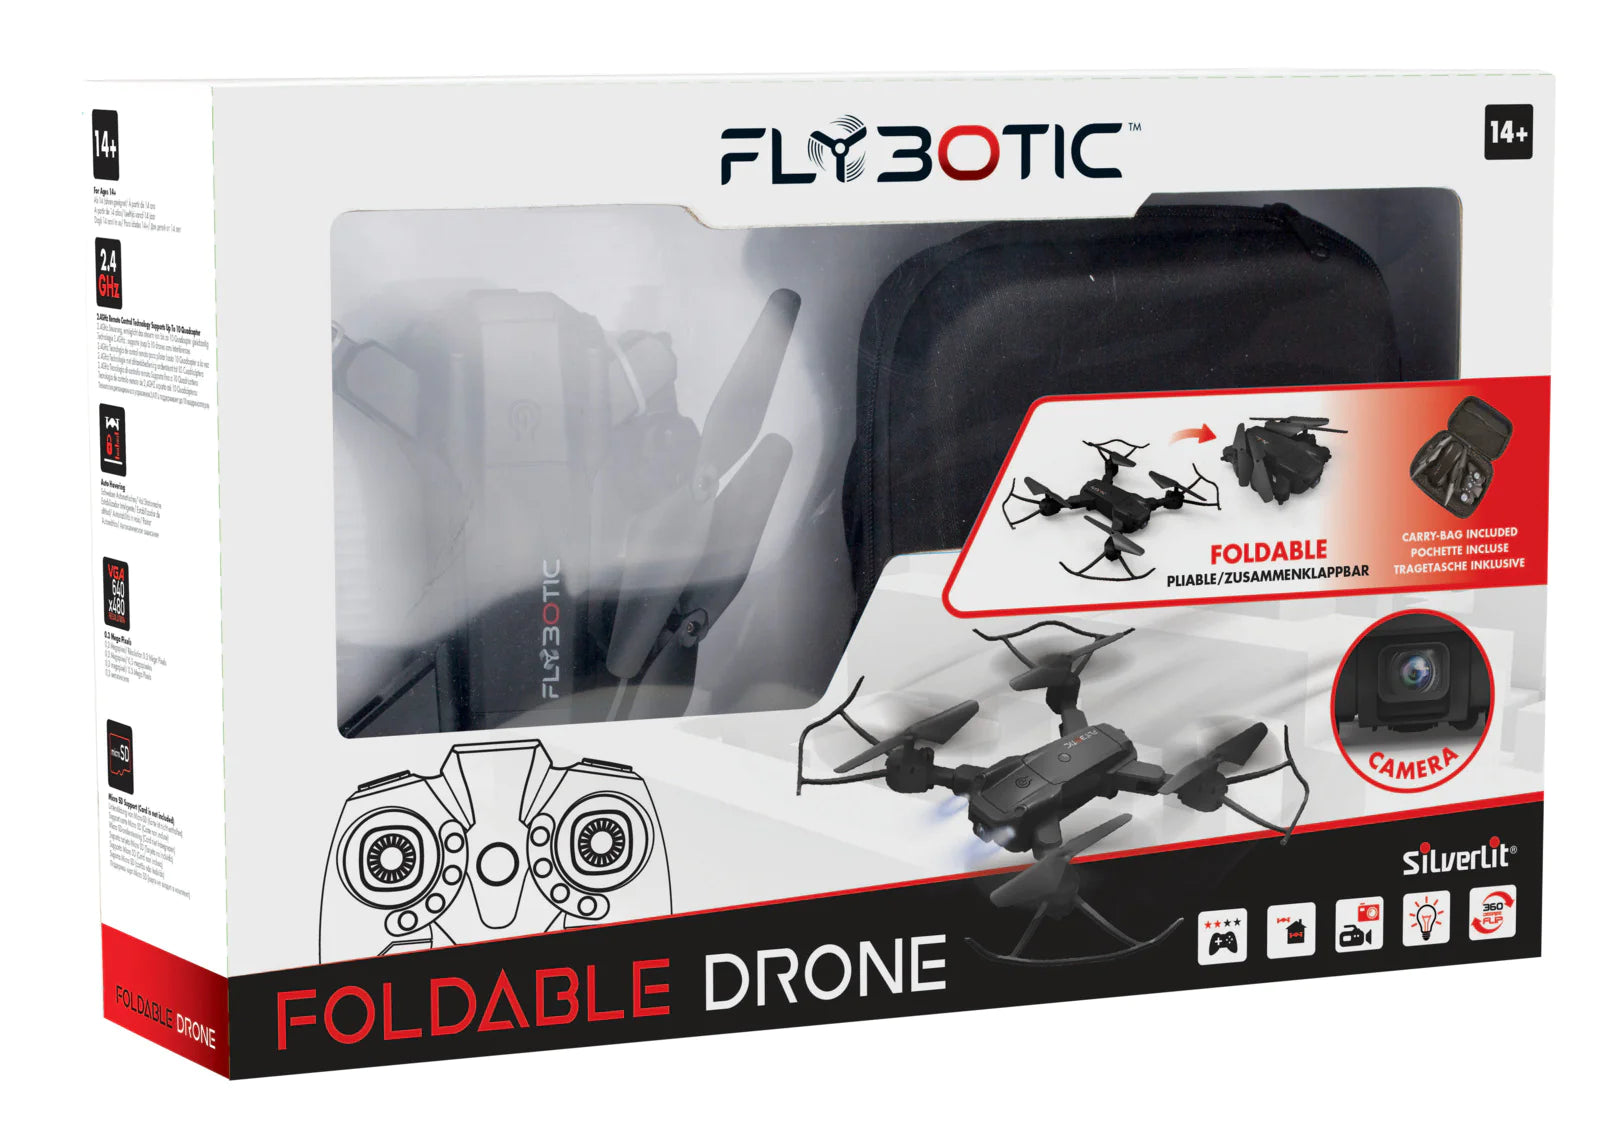 Silverlit Flybotic Foldable Drone req 3 x AAA batteries